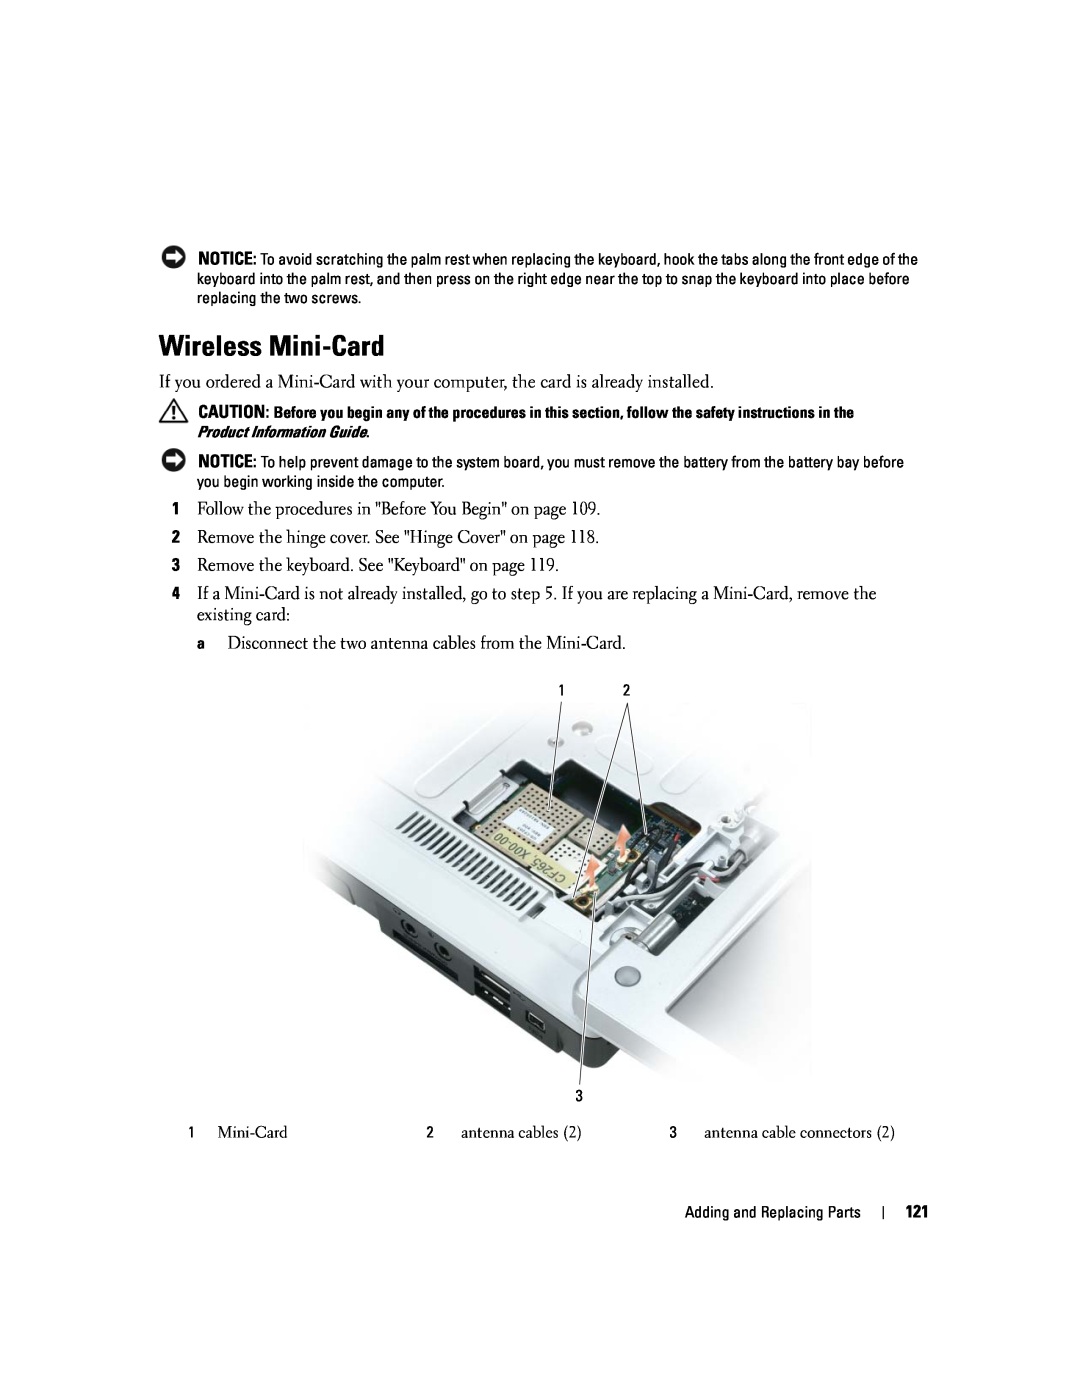 Dell PP20L owner manual Wireless Mini-Card, antenna cables, antenna cable connectors 